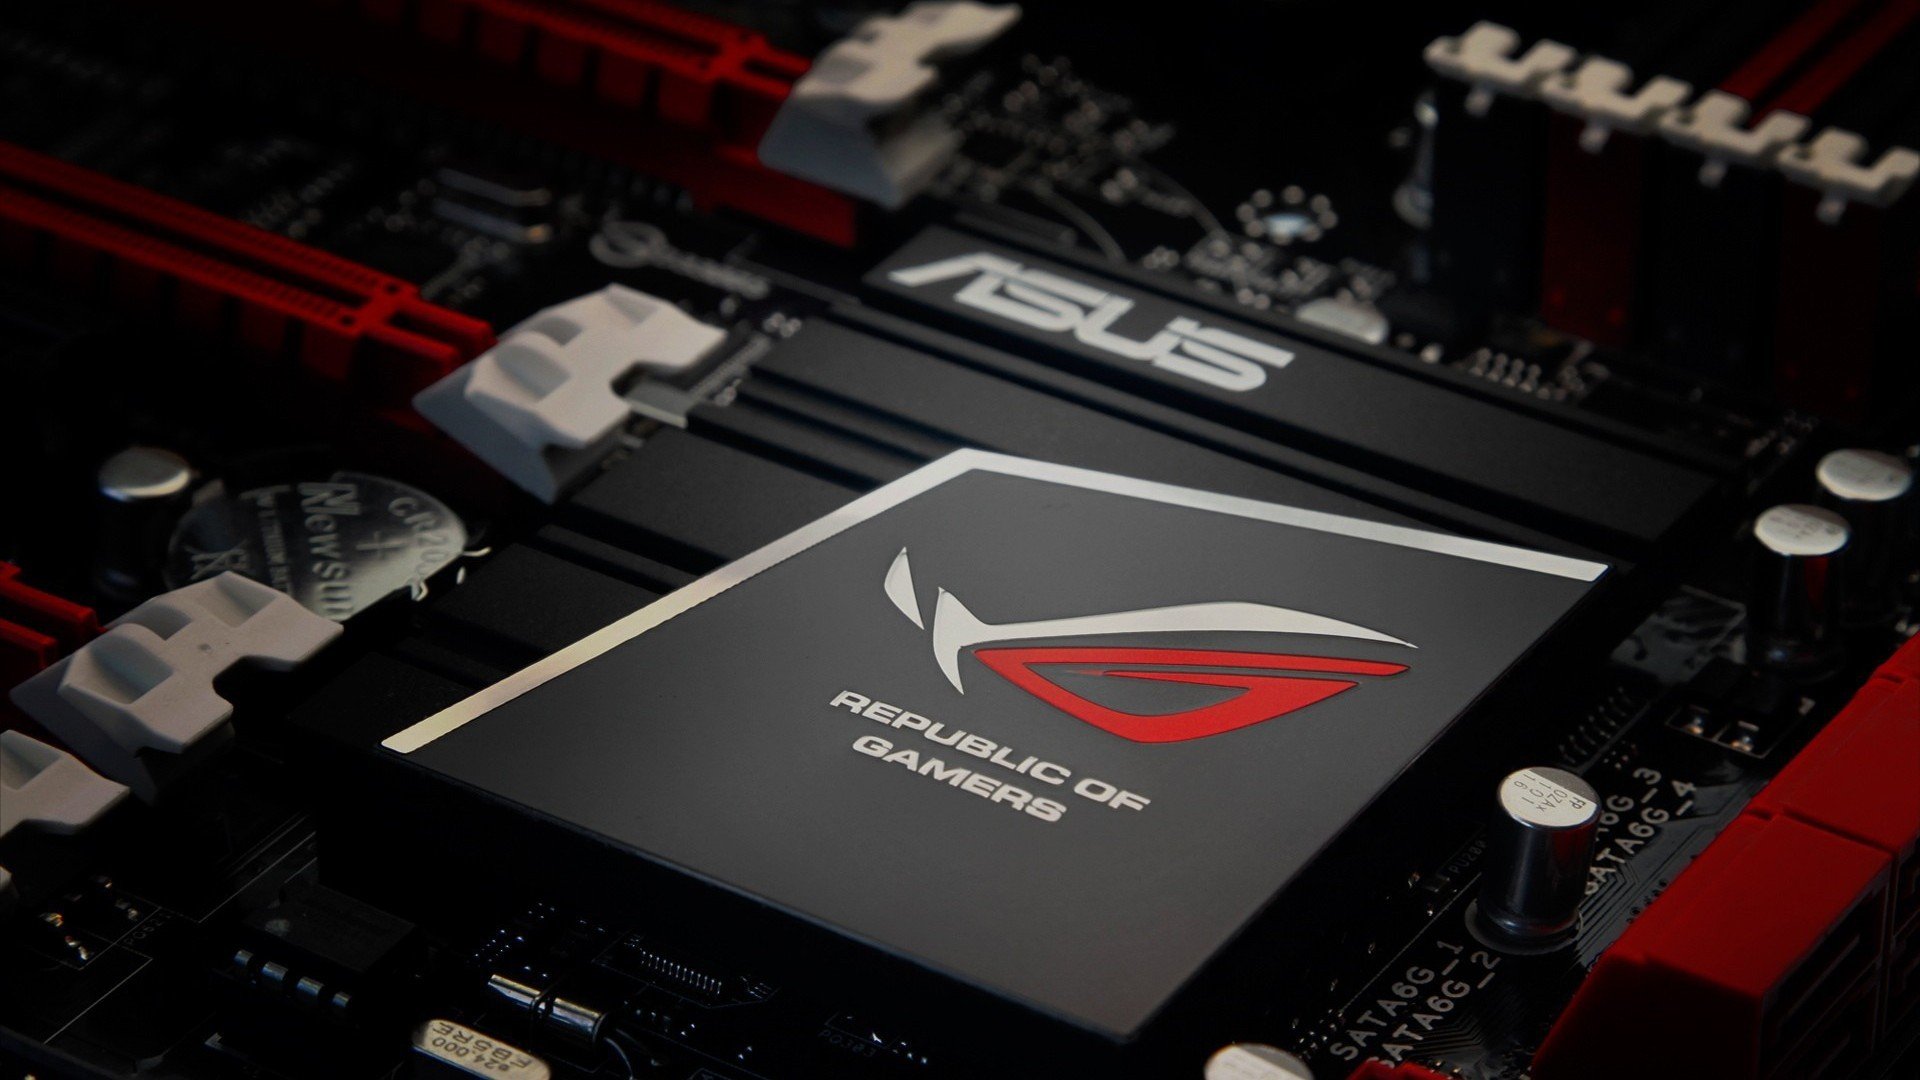 ASUS, Republic of Gamers, Computer, Motherboards, PC gaming Wallpaper